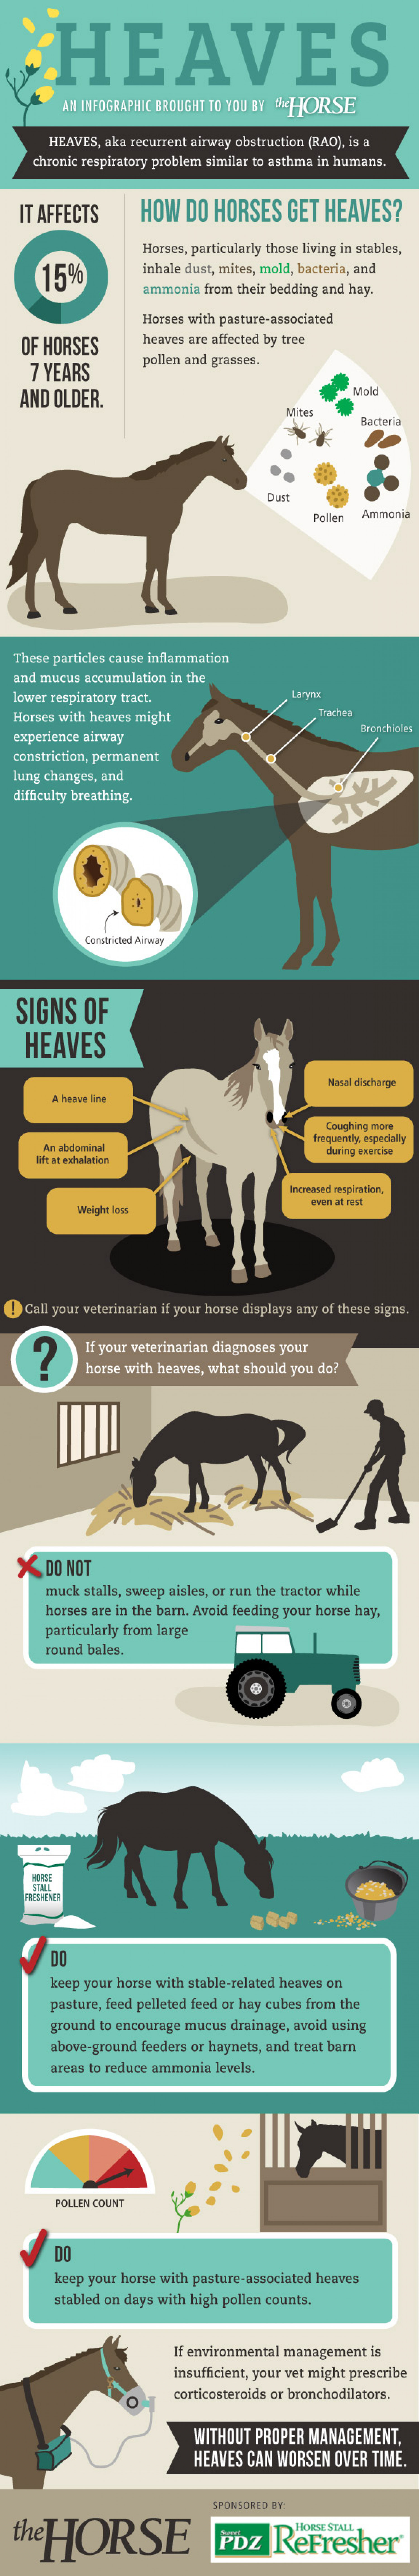 Heaves in Horses Infographic